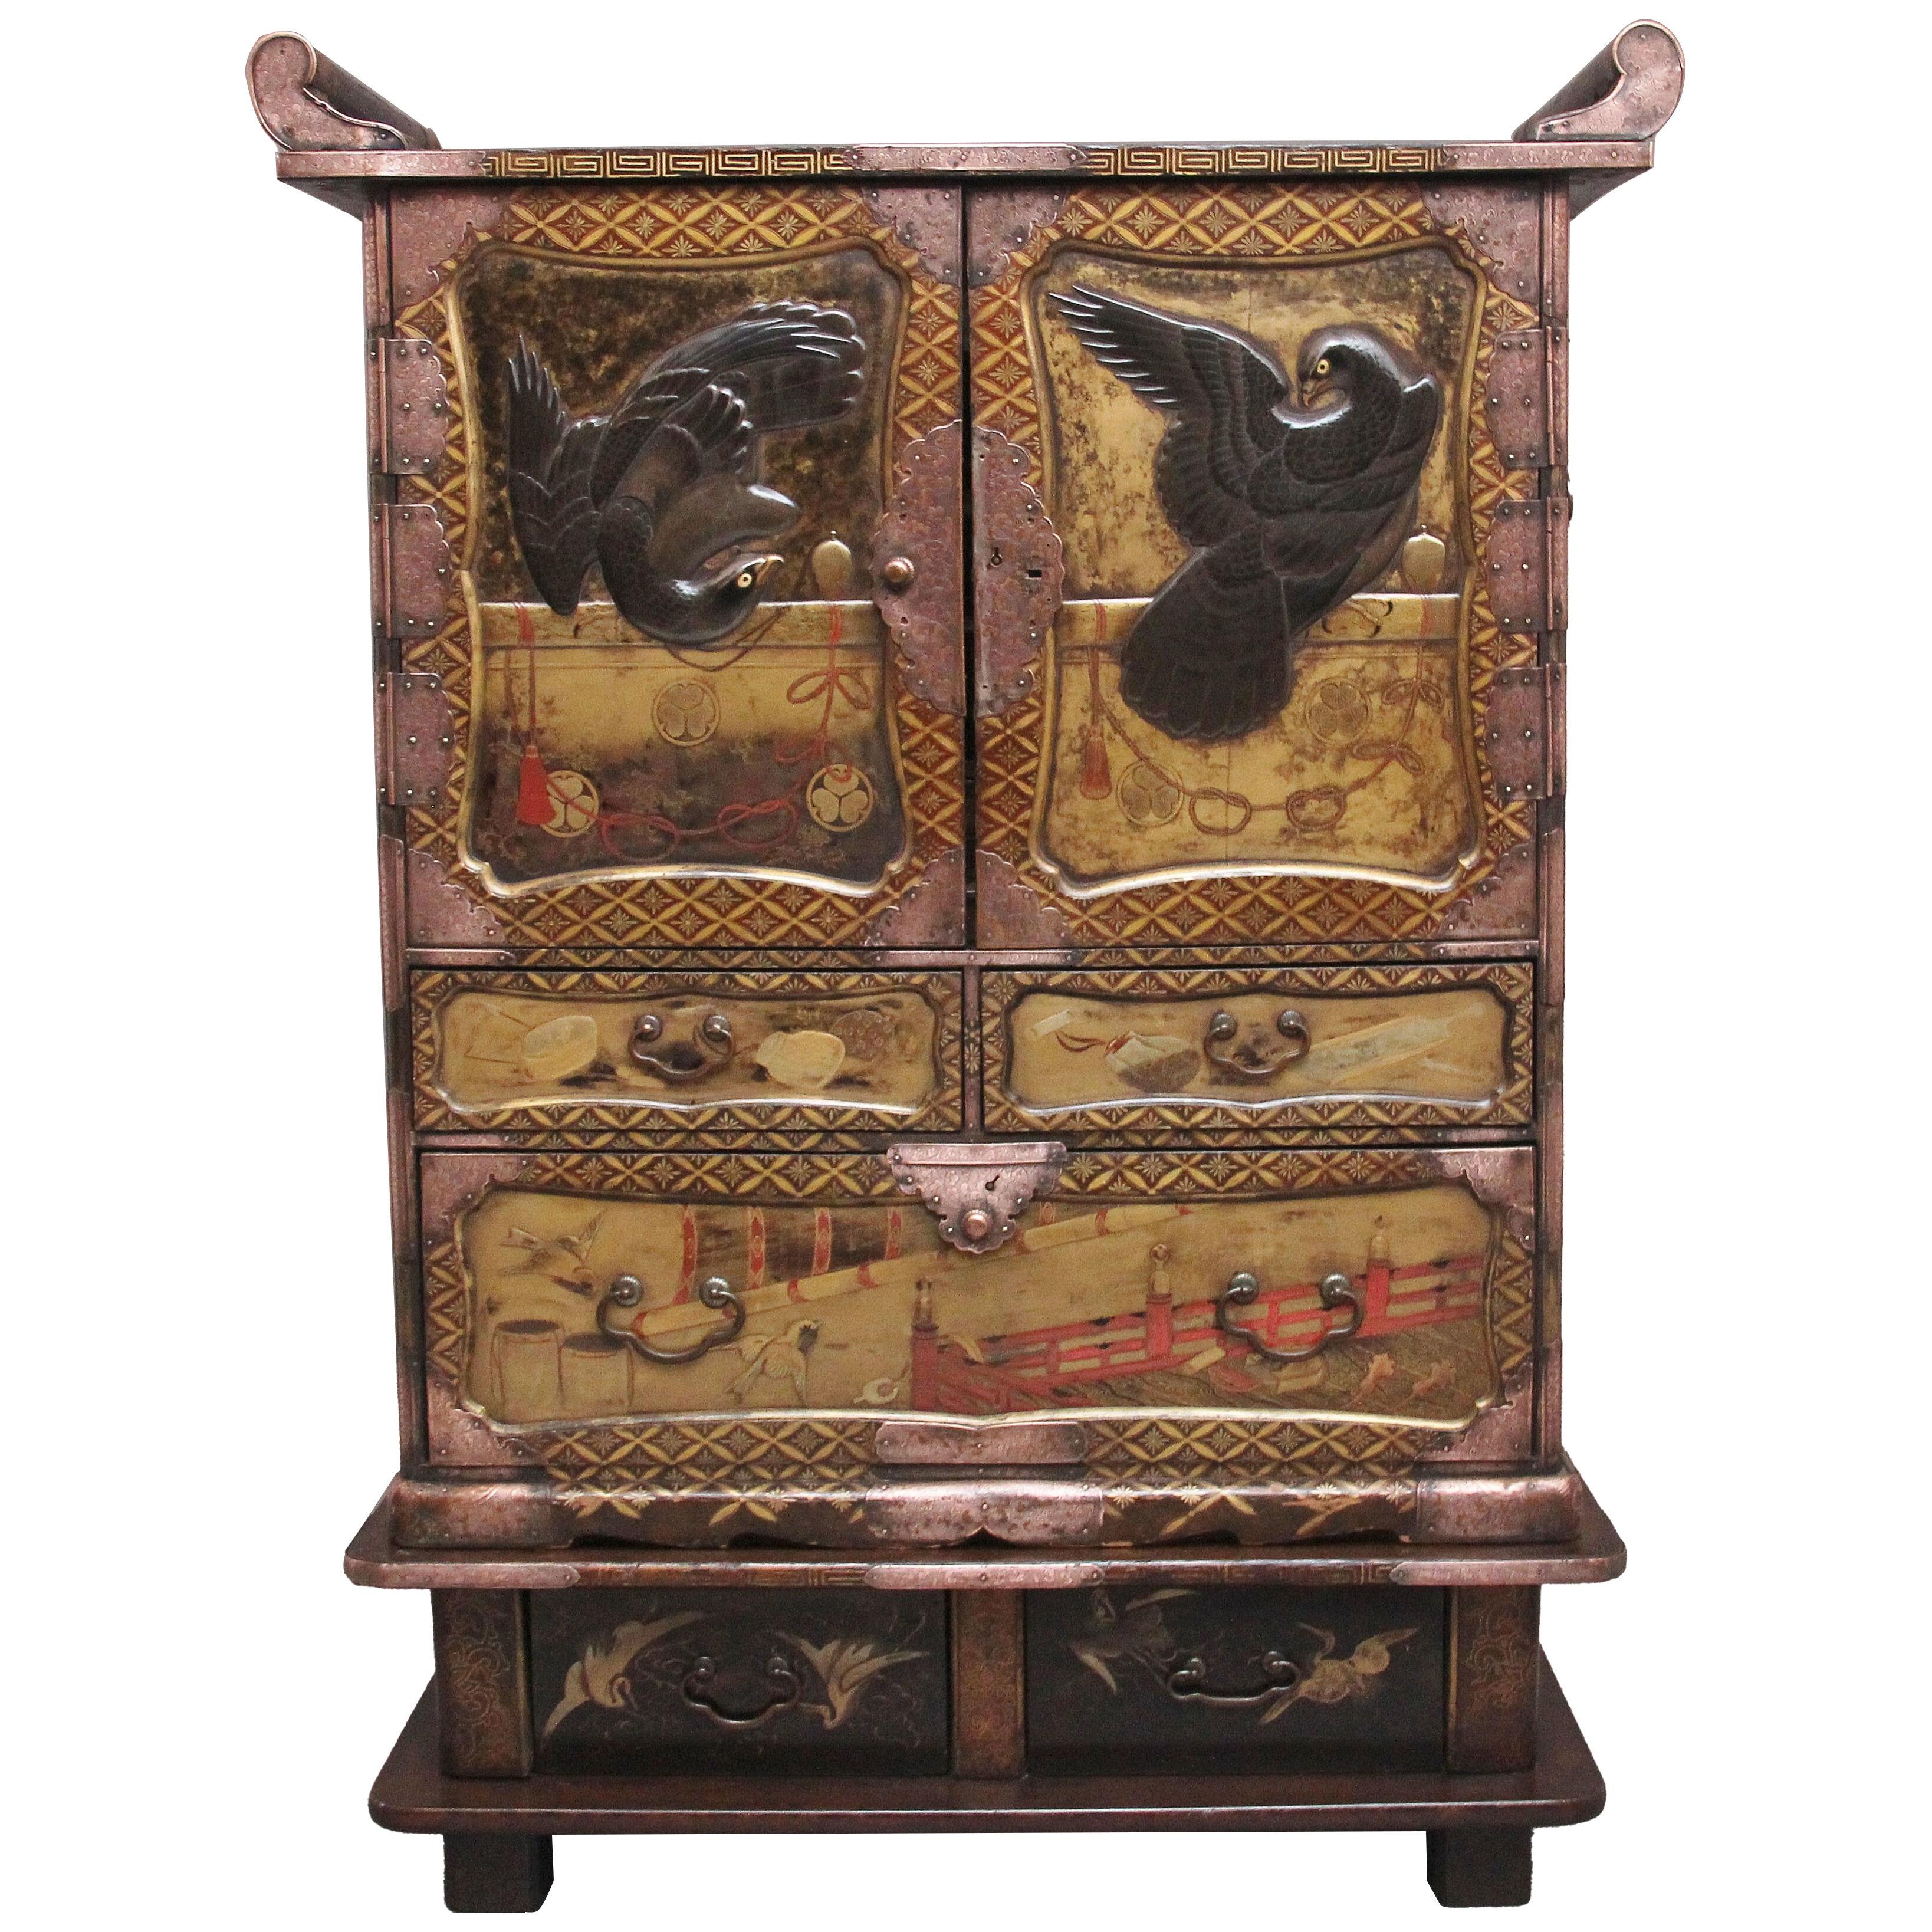 19th Century Japanese gilt lacquered cabinet